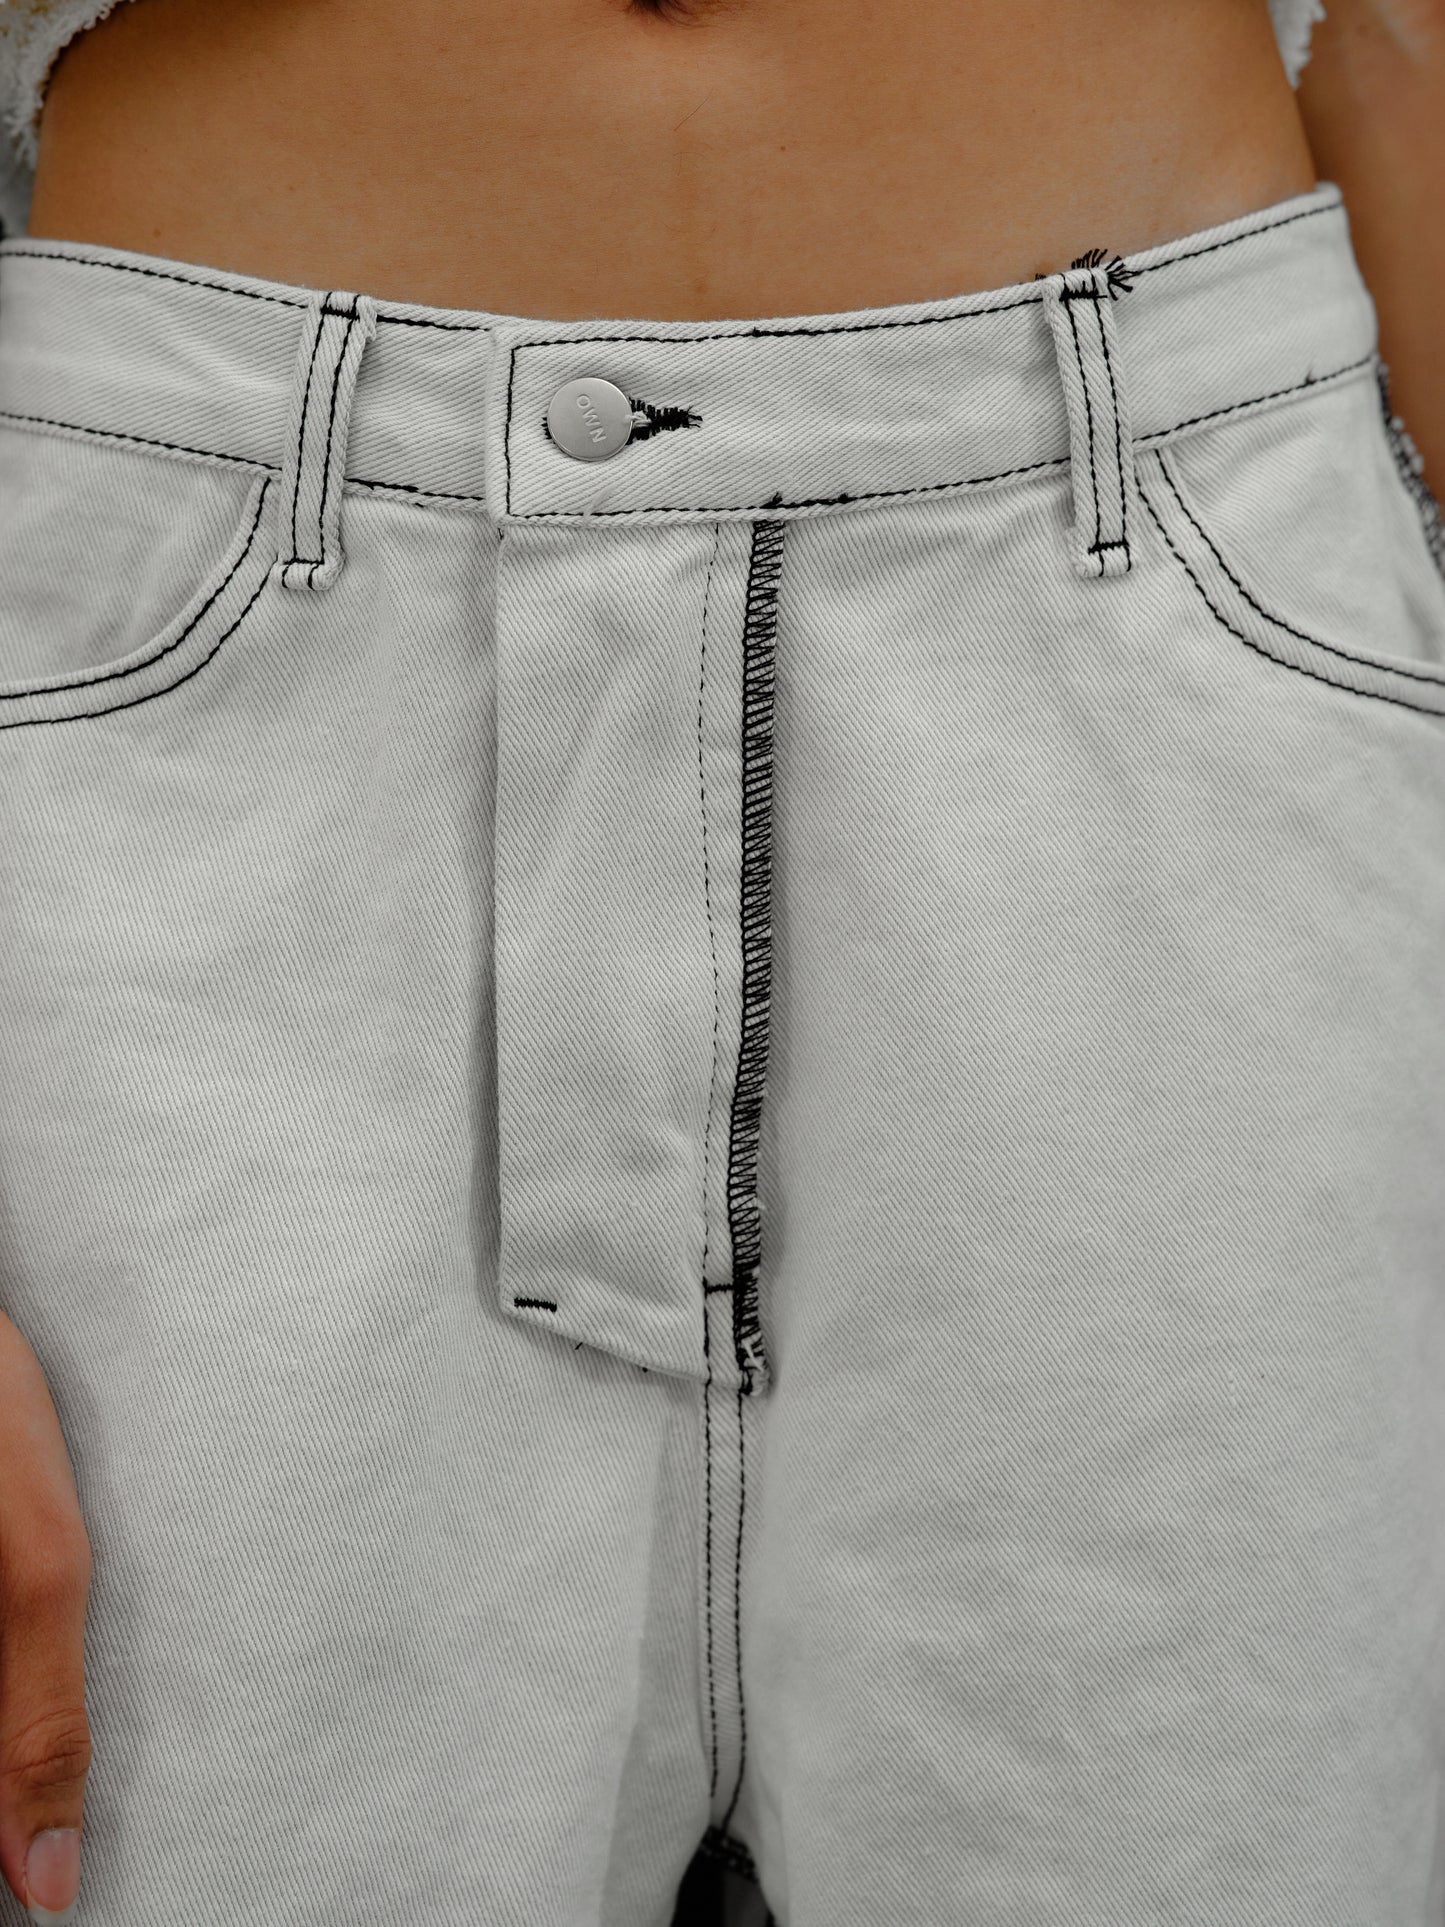 Reverse Stitched Jeans, Washed White